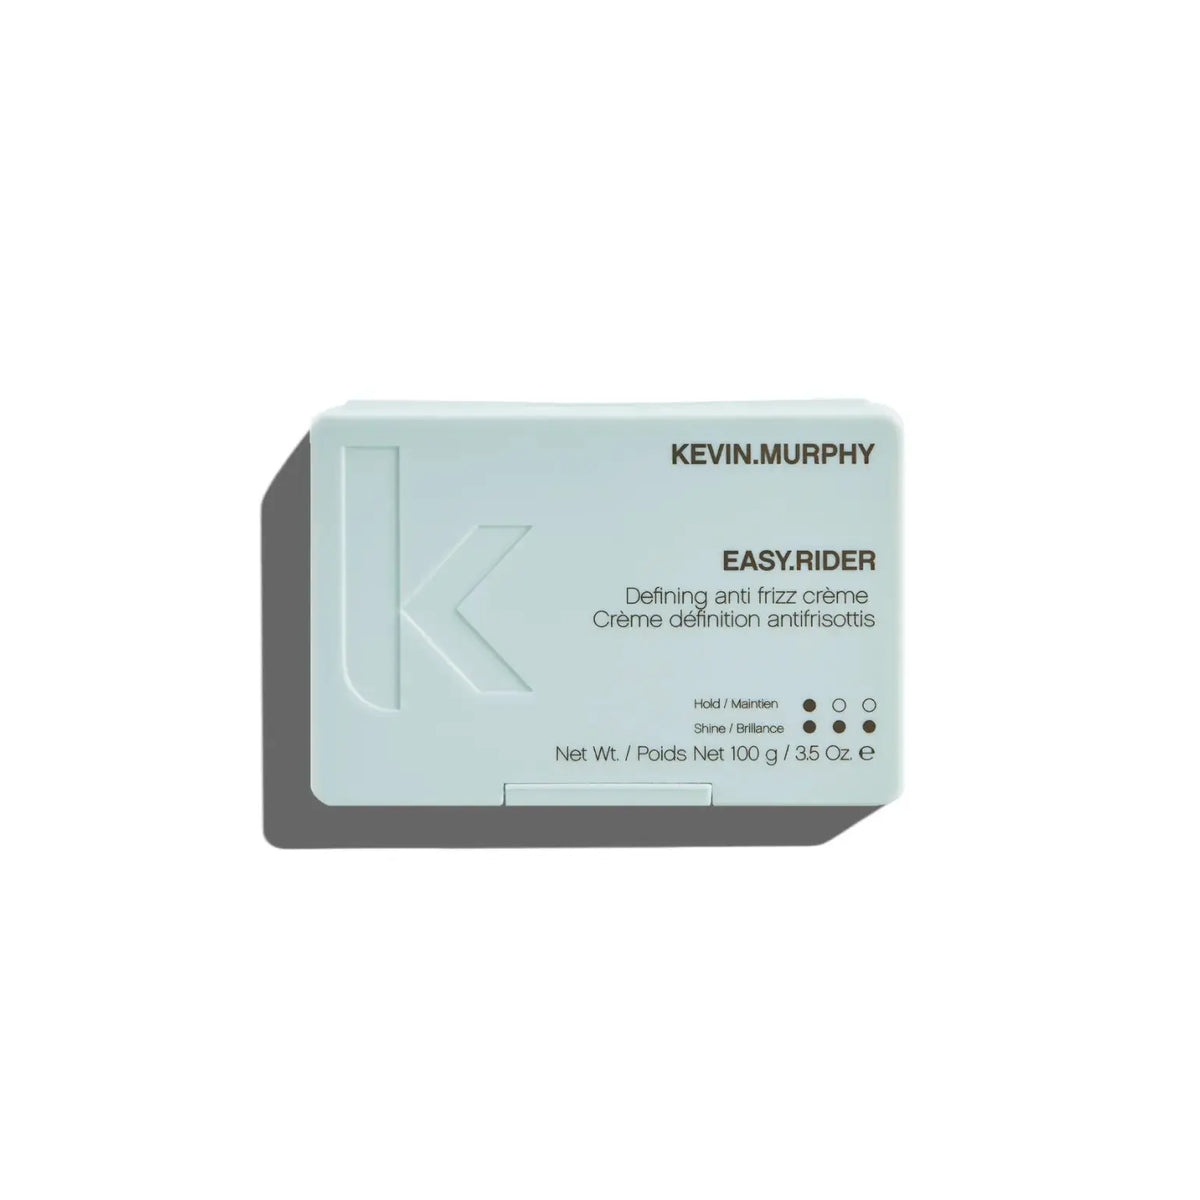 KEVIN MURPHY EASY RIDER 